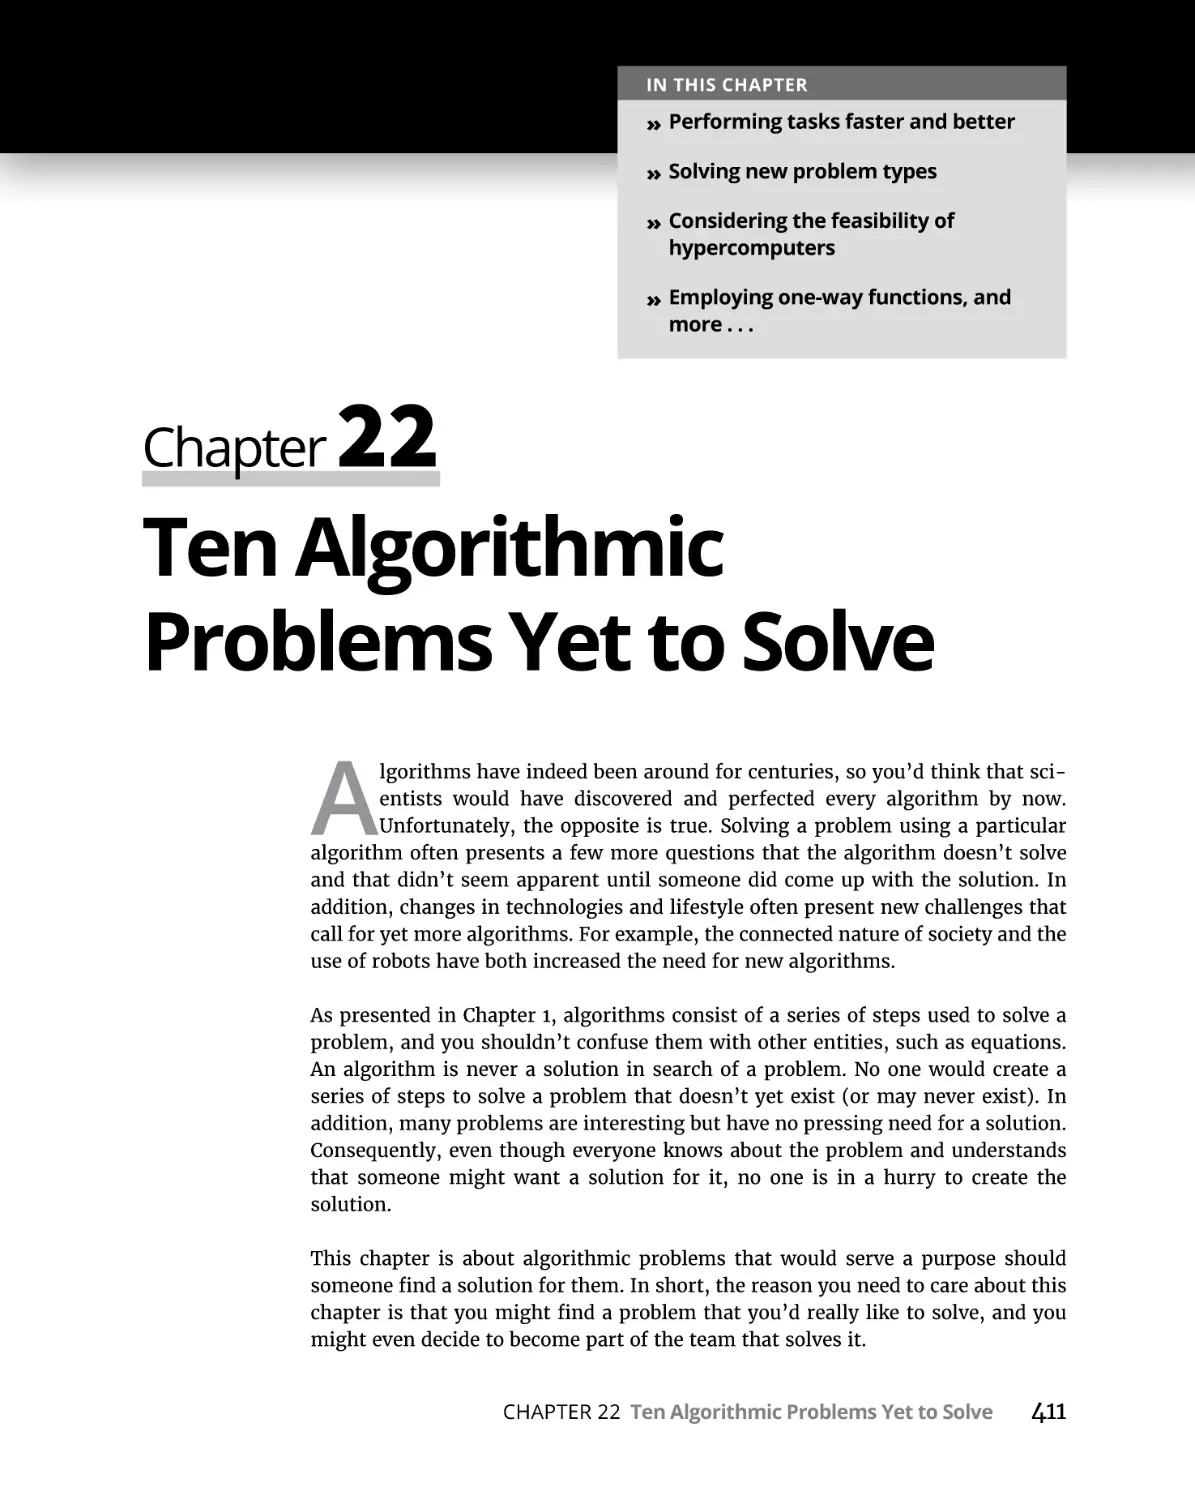 Chapter 22 Ten Algorithmic Problems Yet to Solve